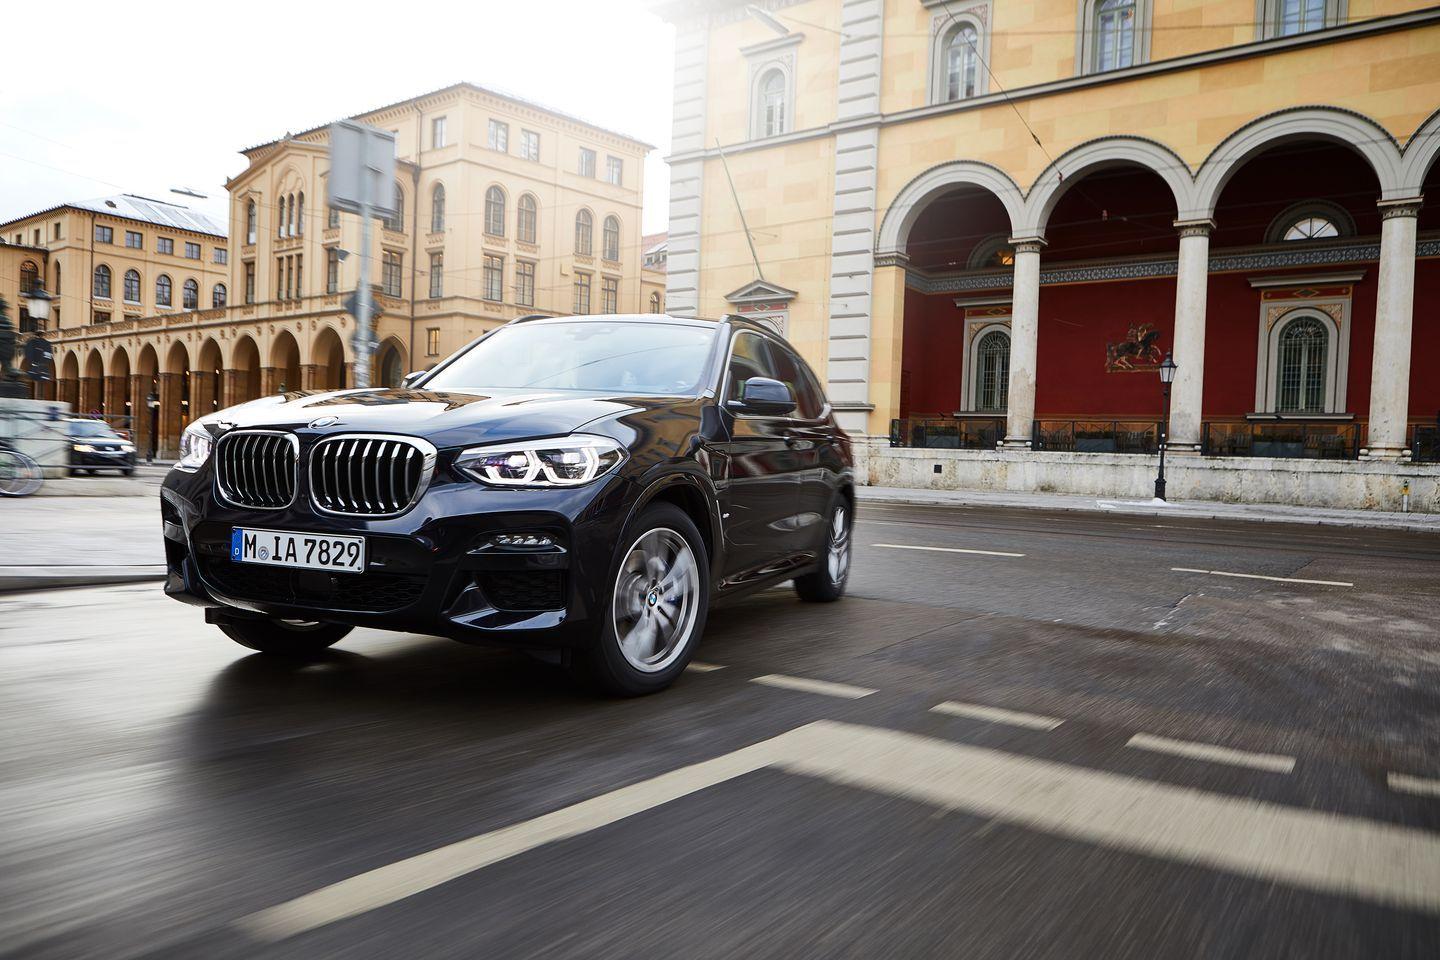 The New BMW X3 Plug In Hybrid Is Coming To The U.S. In 2020